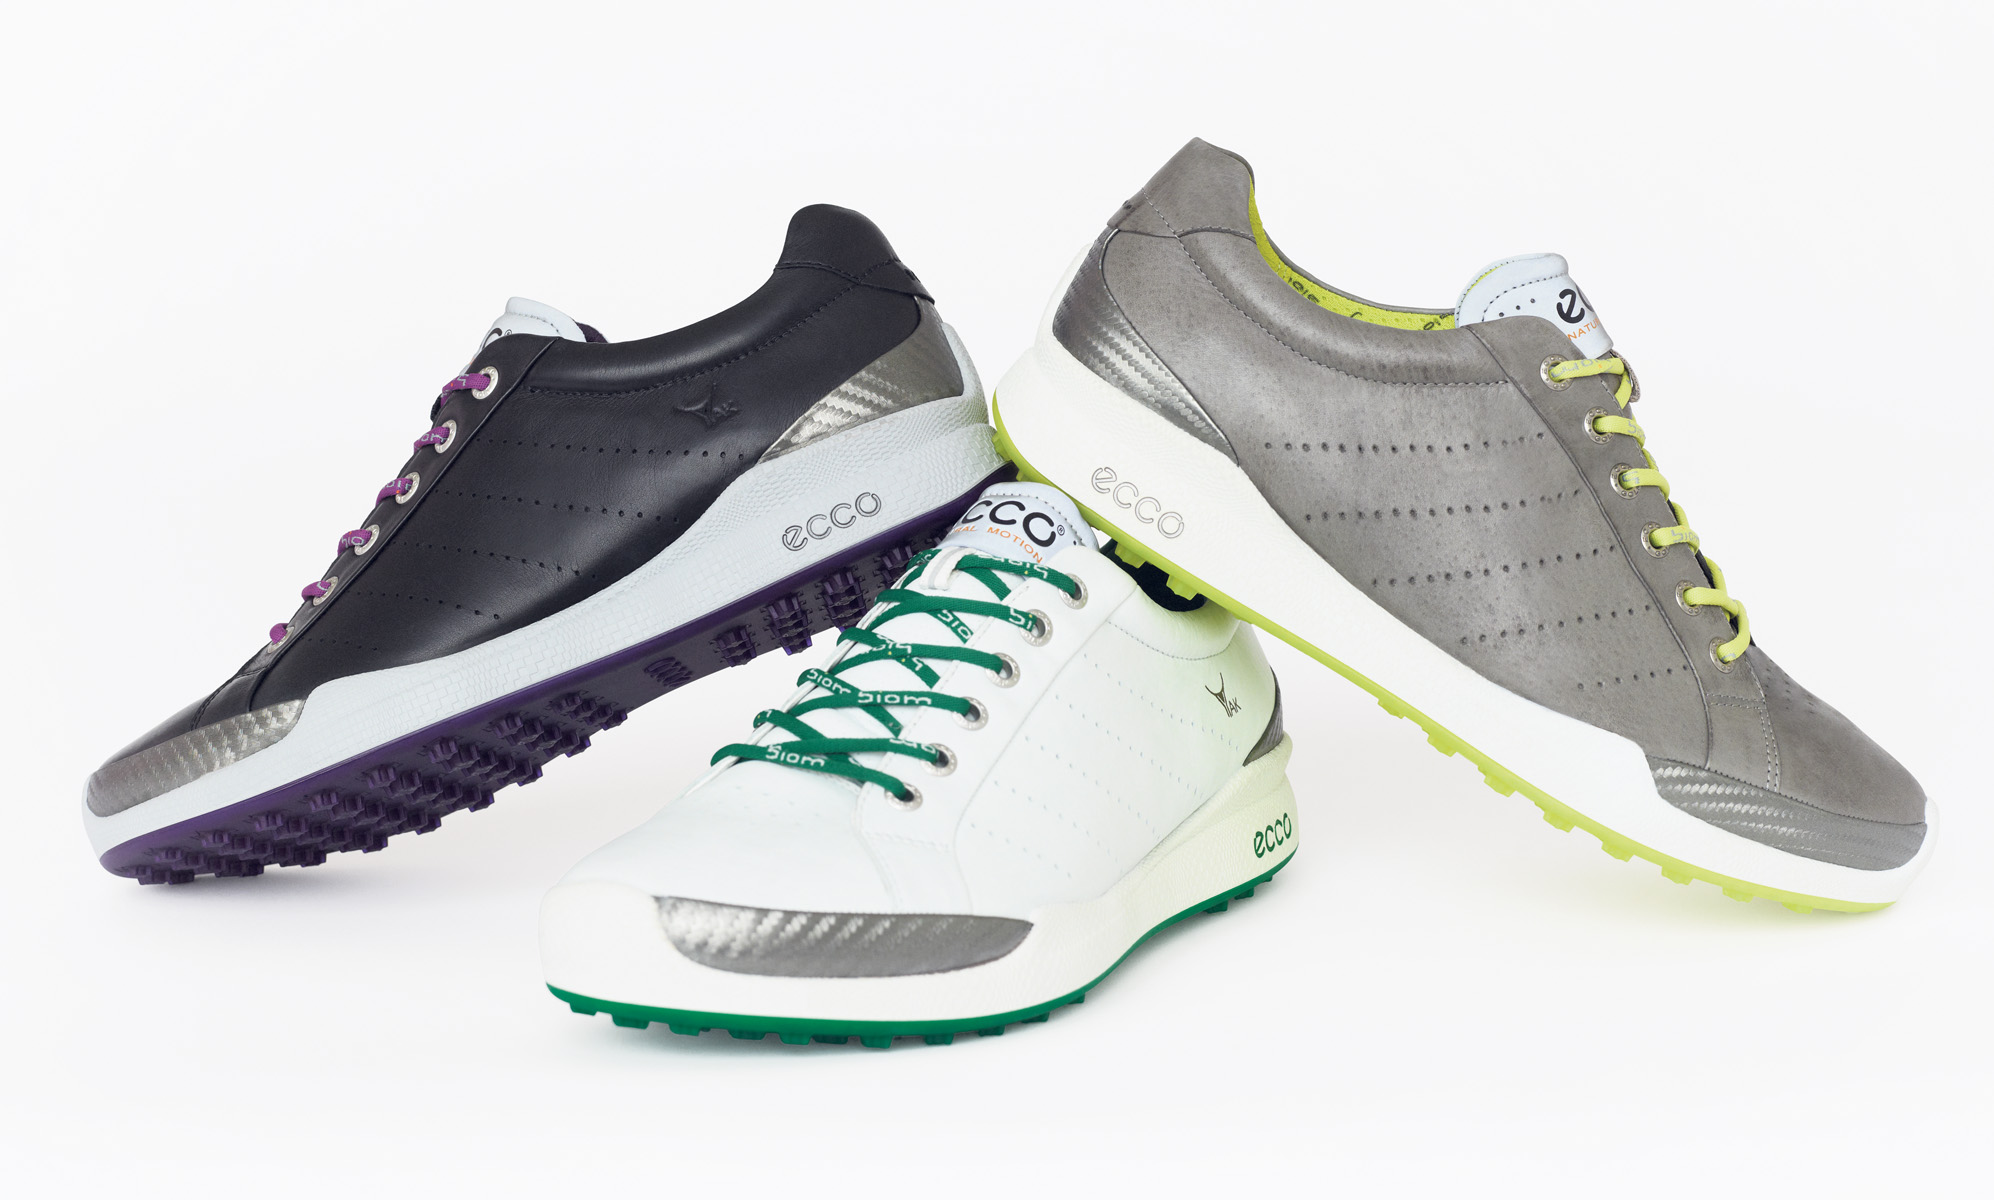 ECCO Continues to Evolve for 2013 